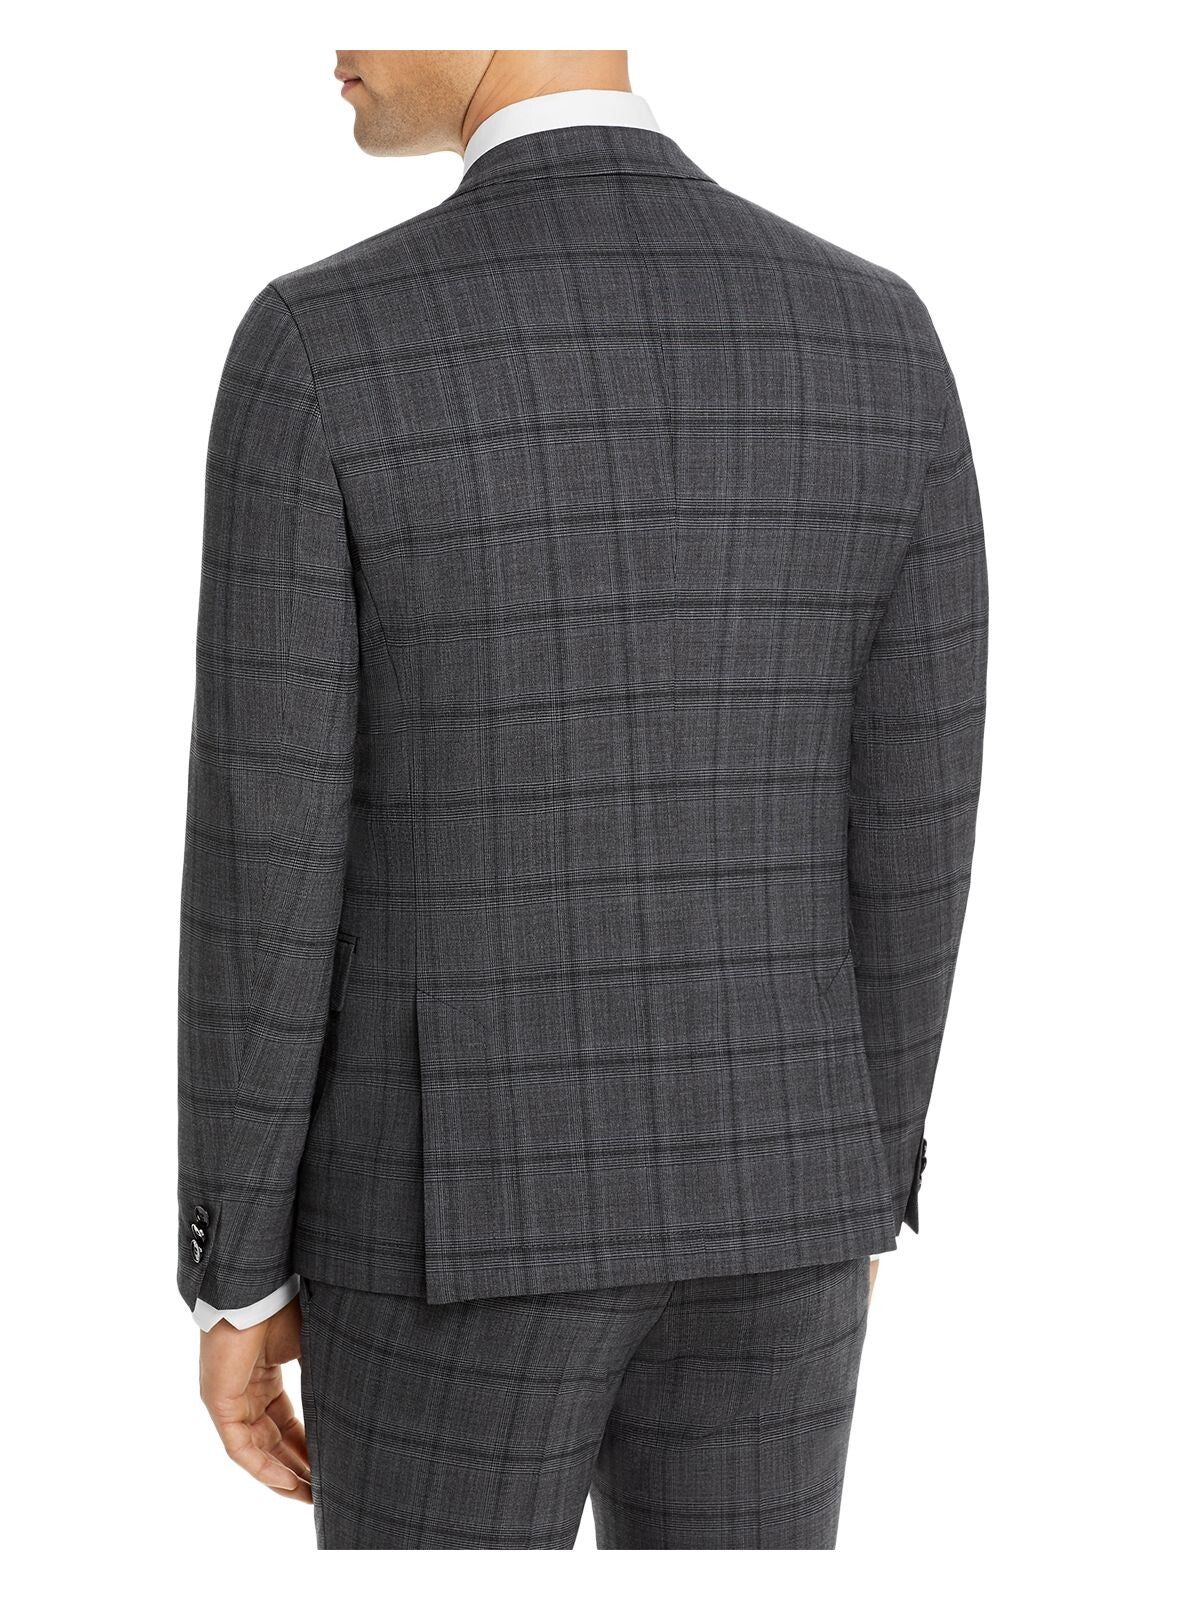 HUGO Mens Boss Red Label Anfred Gray Single Breasted, Windowpane Plaid Suit Jacket 38R